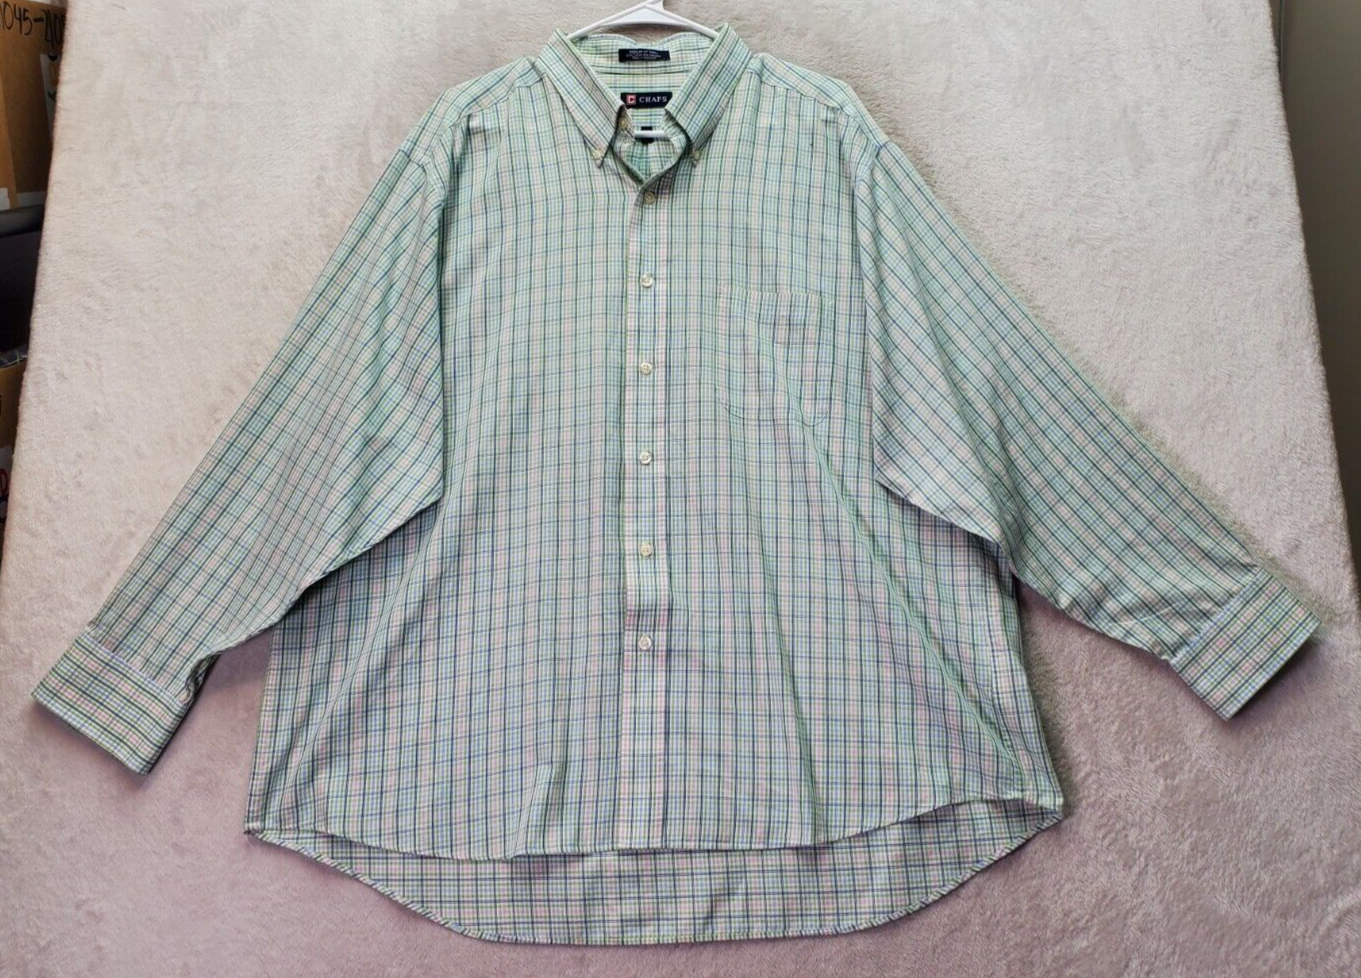 Primary image for Chaps Dress Shirt Mens Sz 2XL Green Plaid Regular Fit Twill Collared Button Down